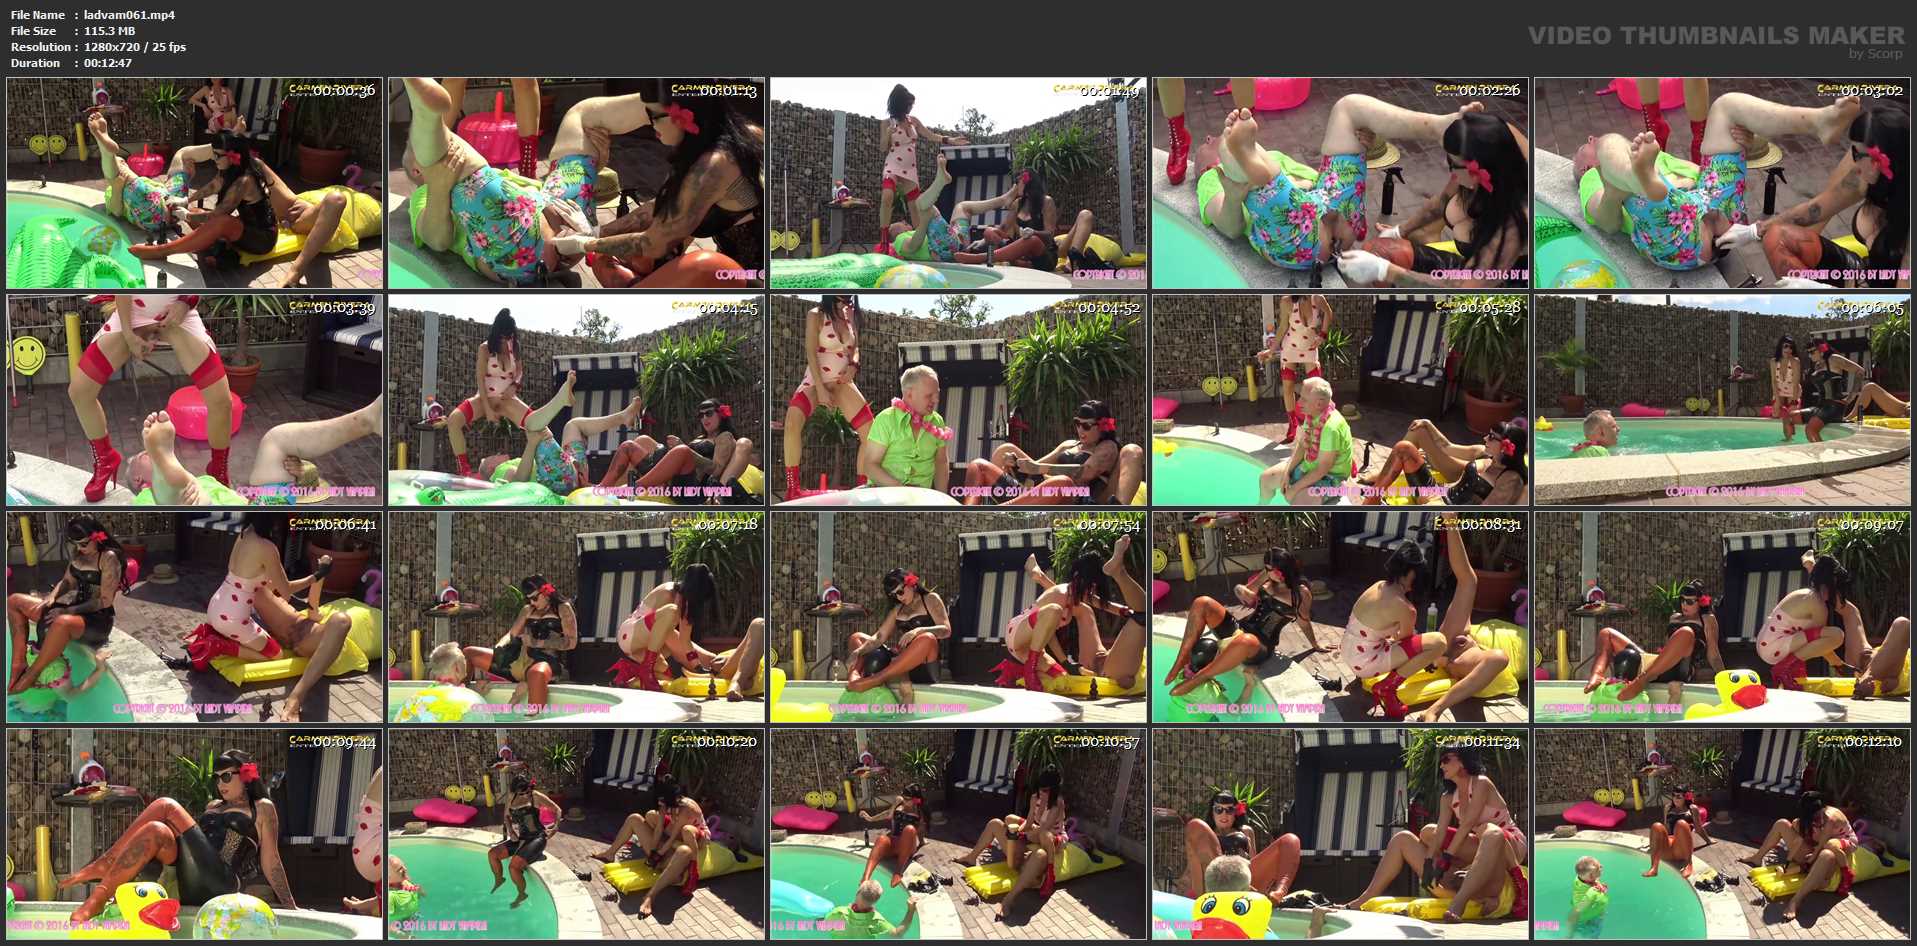 Lady VampiraCarmen Rivera, Lady Vampira In Scene: Celebrating a pool party with slaves in the Femdom Empire Part 4 - PIN UP DOMINATION BY LADY VAMPIRA - HD/720p/MP4